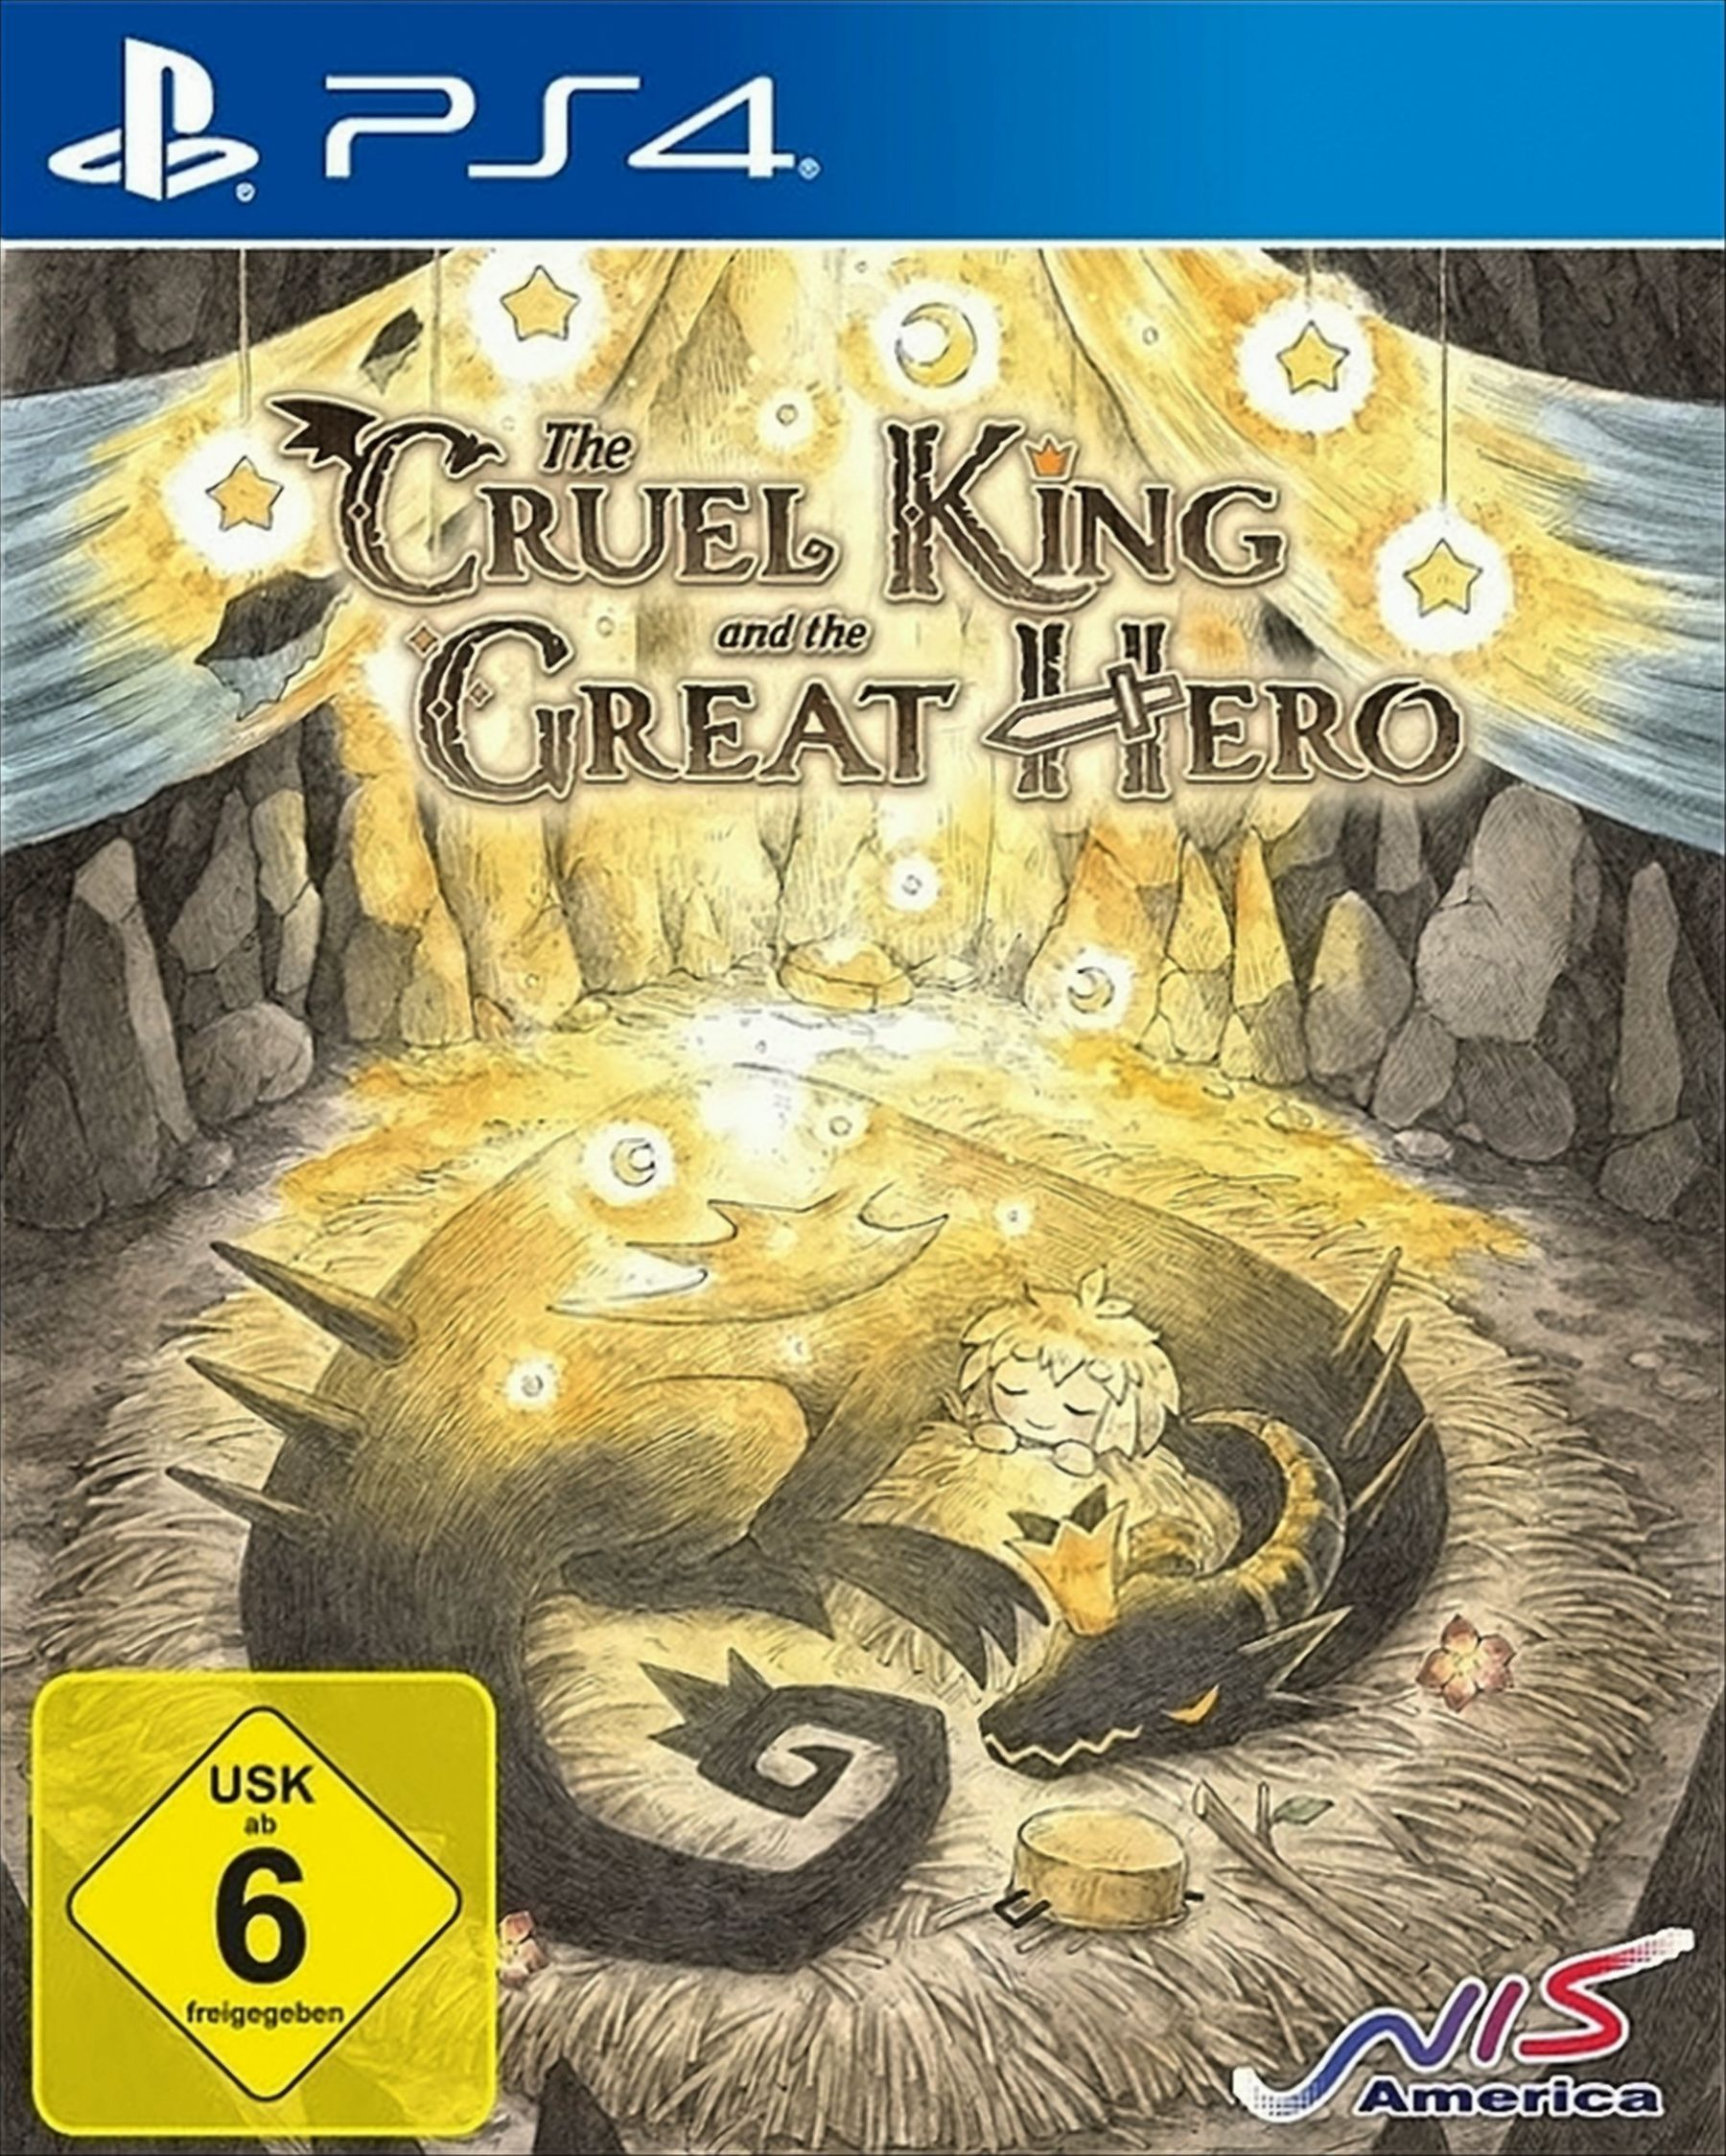 Edition Hero 4] Cruel [PlayStation Great The Storybook the and King - -